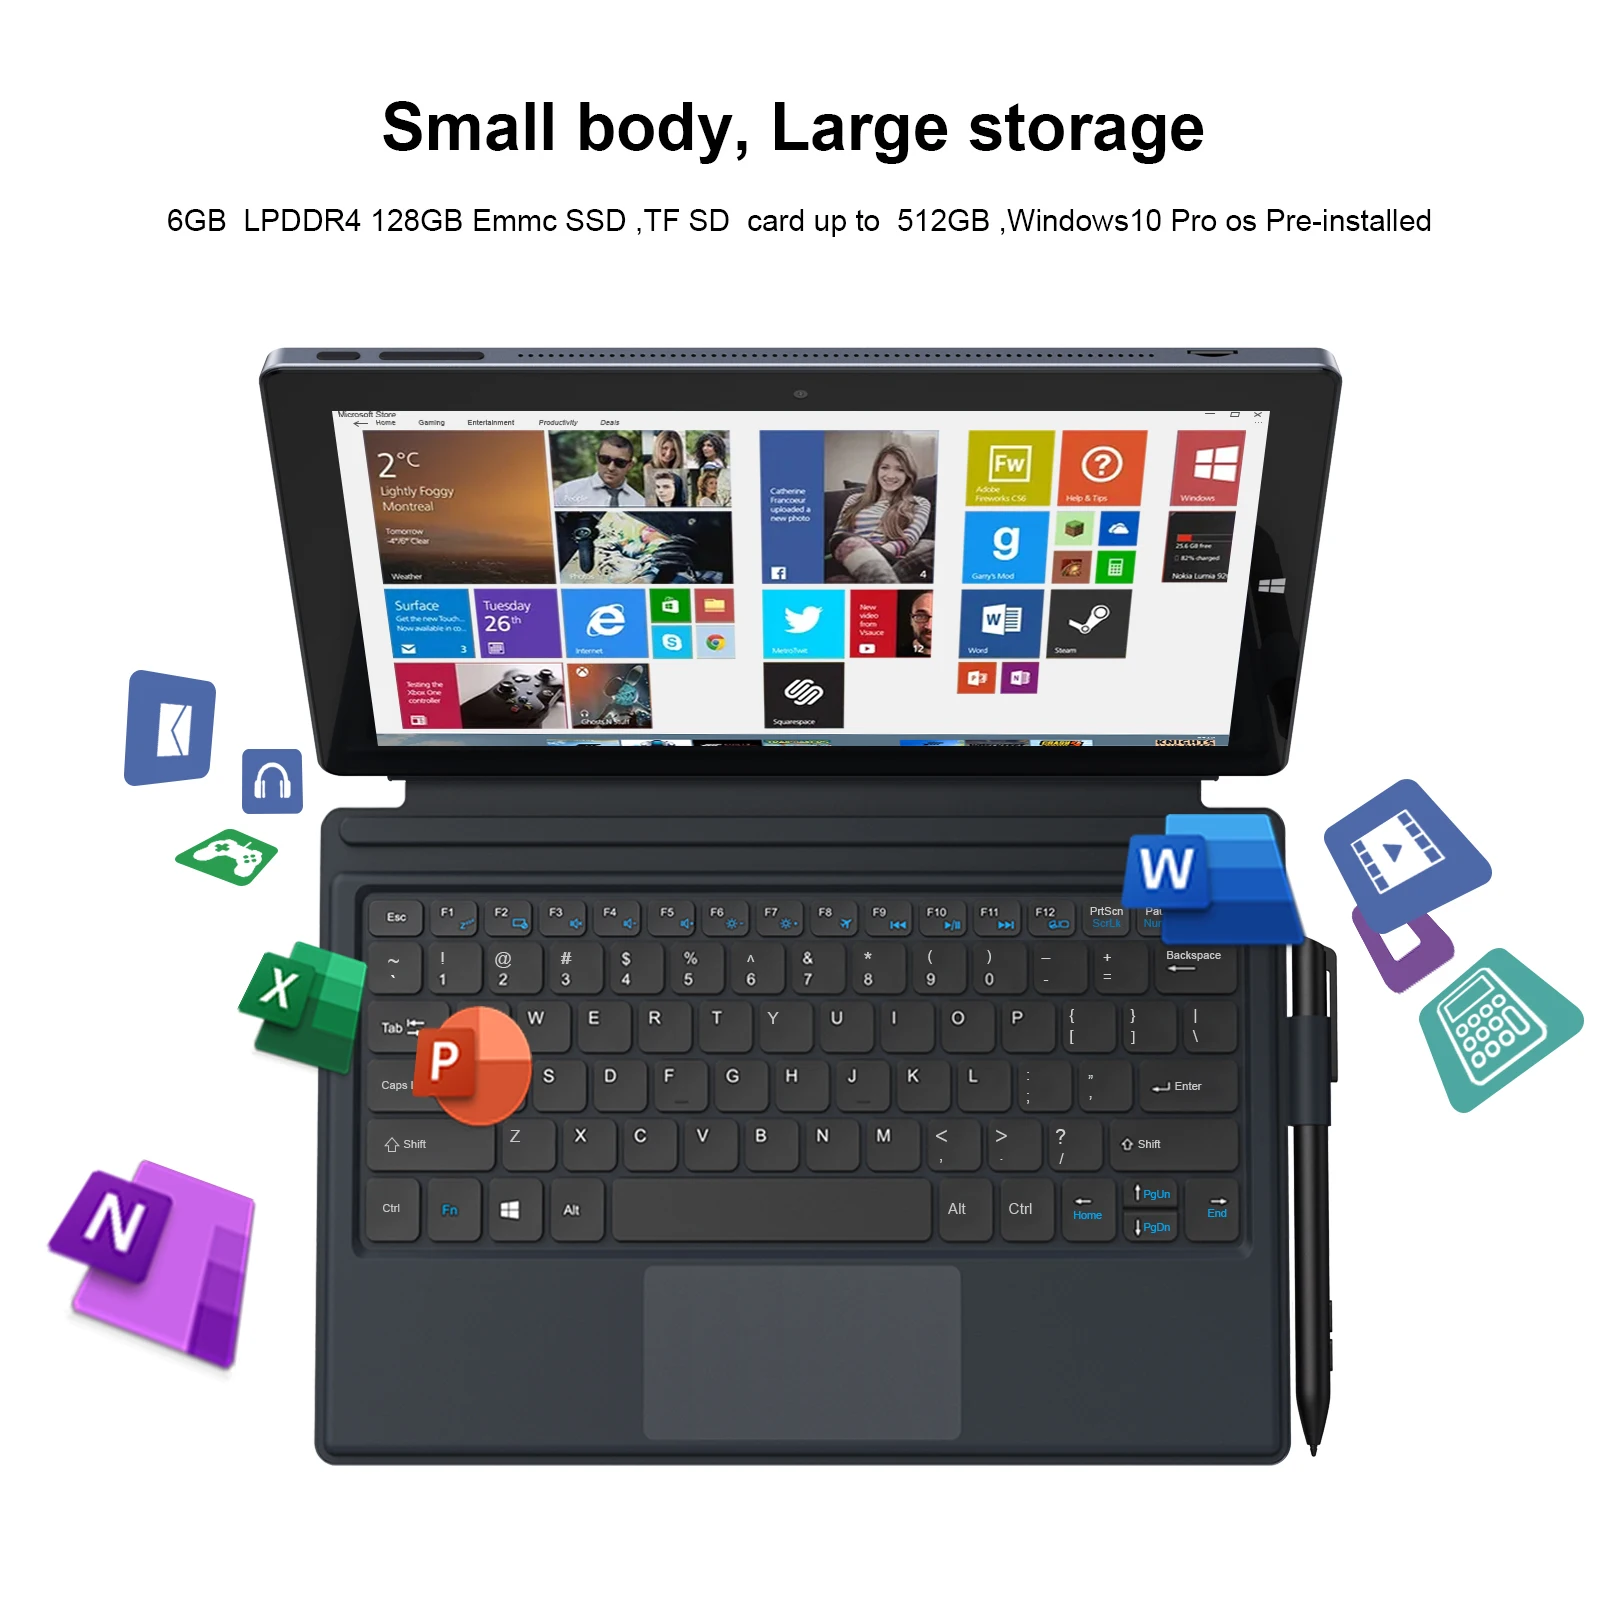 Image of laptop computer showcasing computer specs. 8GB of memory, 128GB of storage, SD card up to 512GB can be added, and windows 10 is pre installed for our 10 inch windows tablets